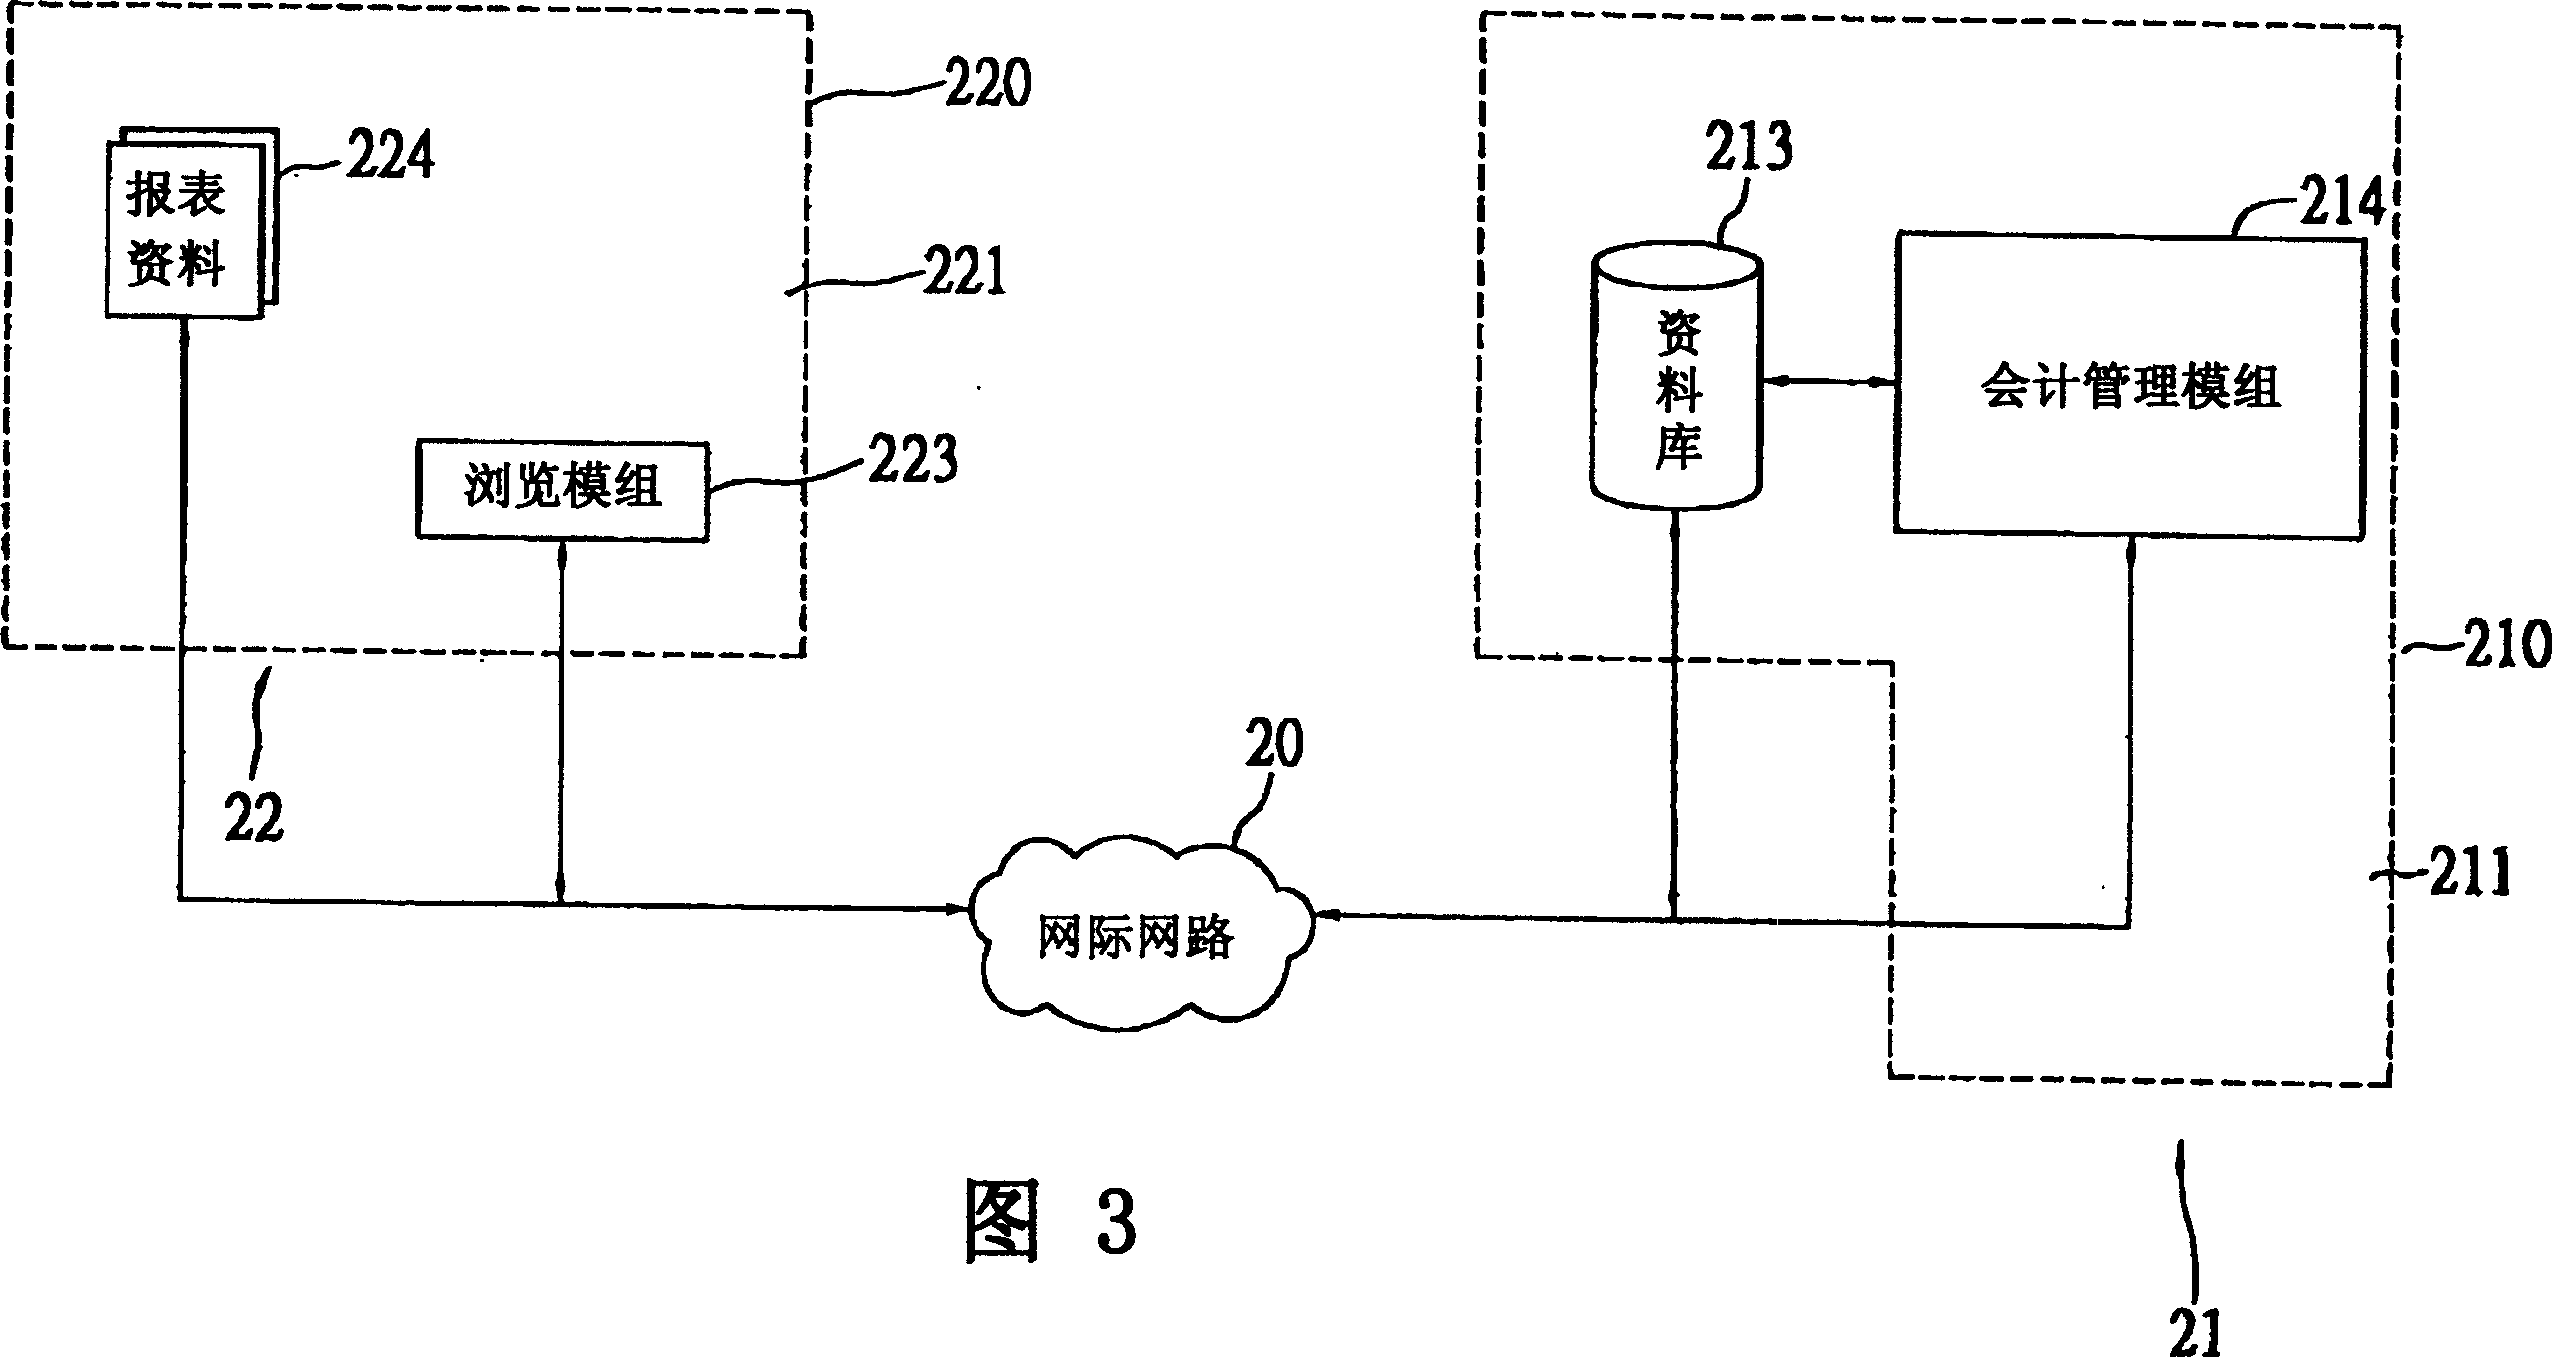 Electronic accounting operation system and method thereof